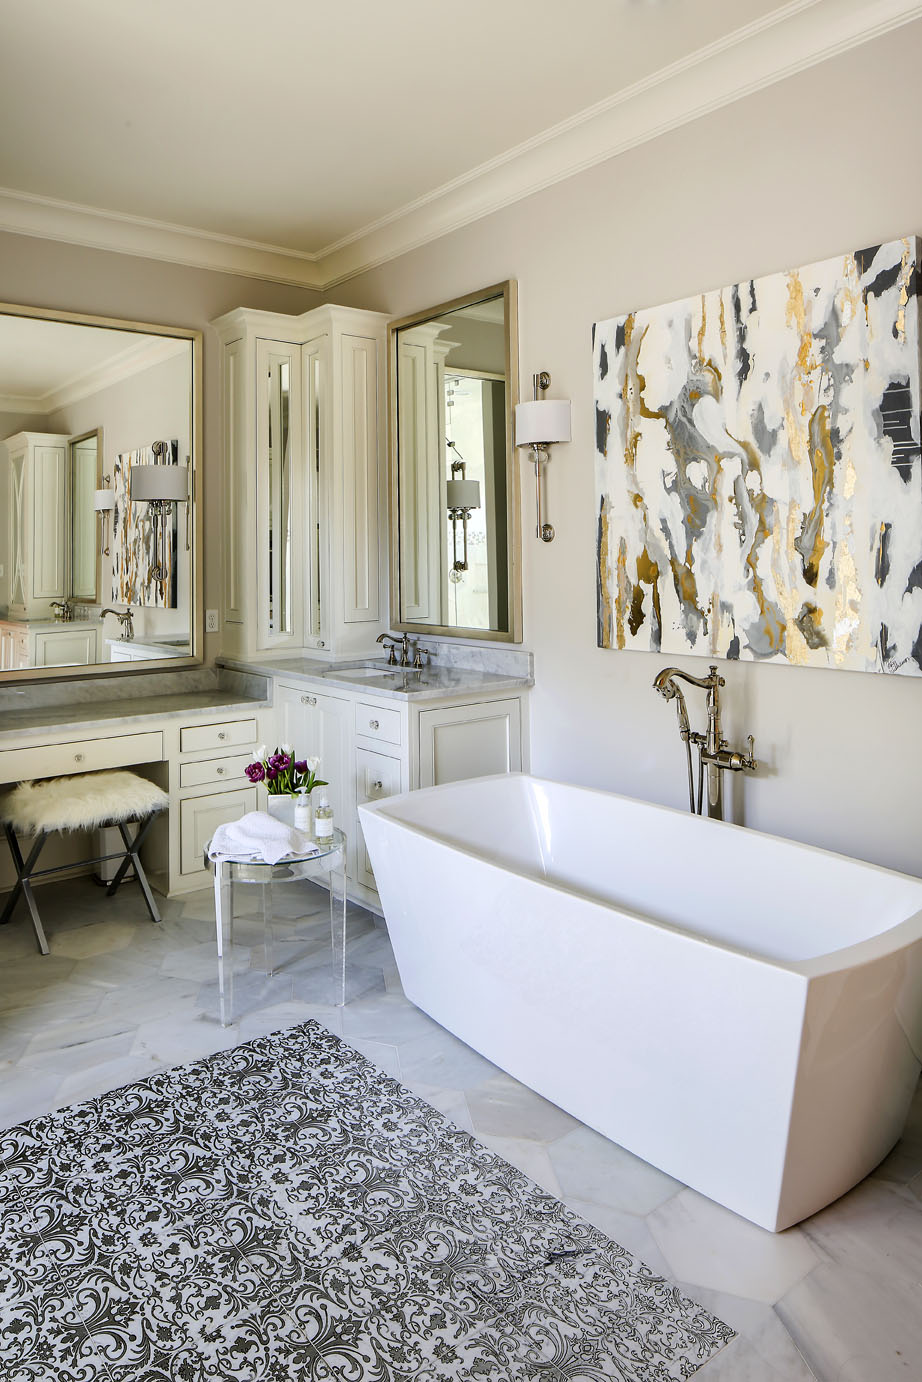 Chuck’s aunt Betsy Williamson captured the metallic hues of the master bath in an abstract painting that now hangs over the freestanding tub. Photo by Melissa Oivanki.